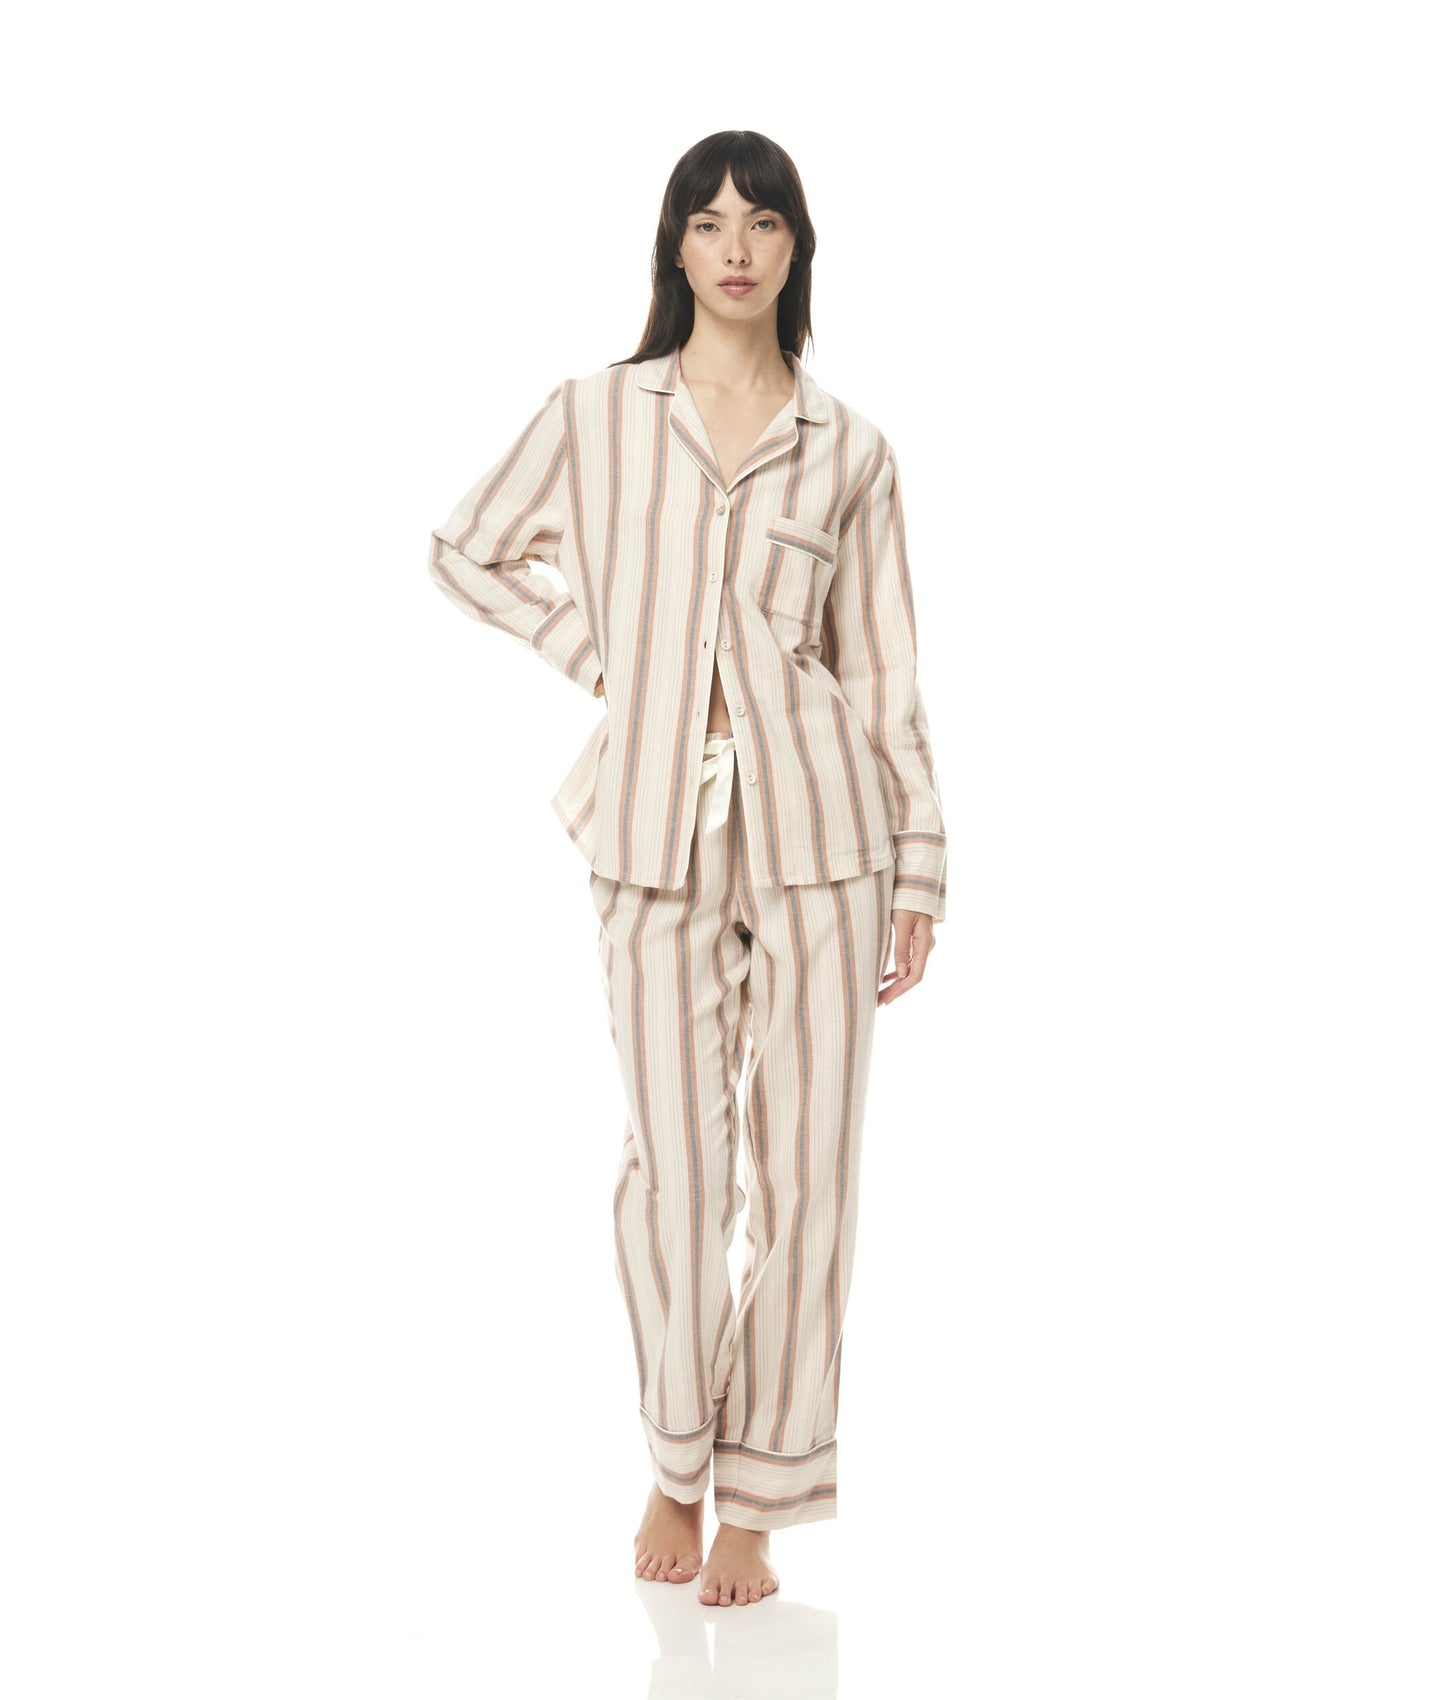 Ilana Cotton Pyjamas | Tan Stripe | The Iliana style pyjamas are crafted from high-quality brushed cotton, making them incredibly soft and warm against your skin.